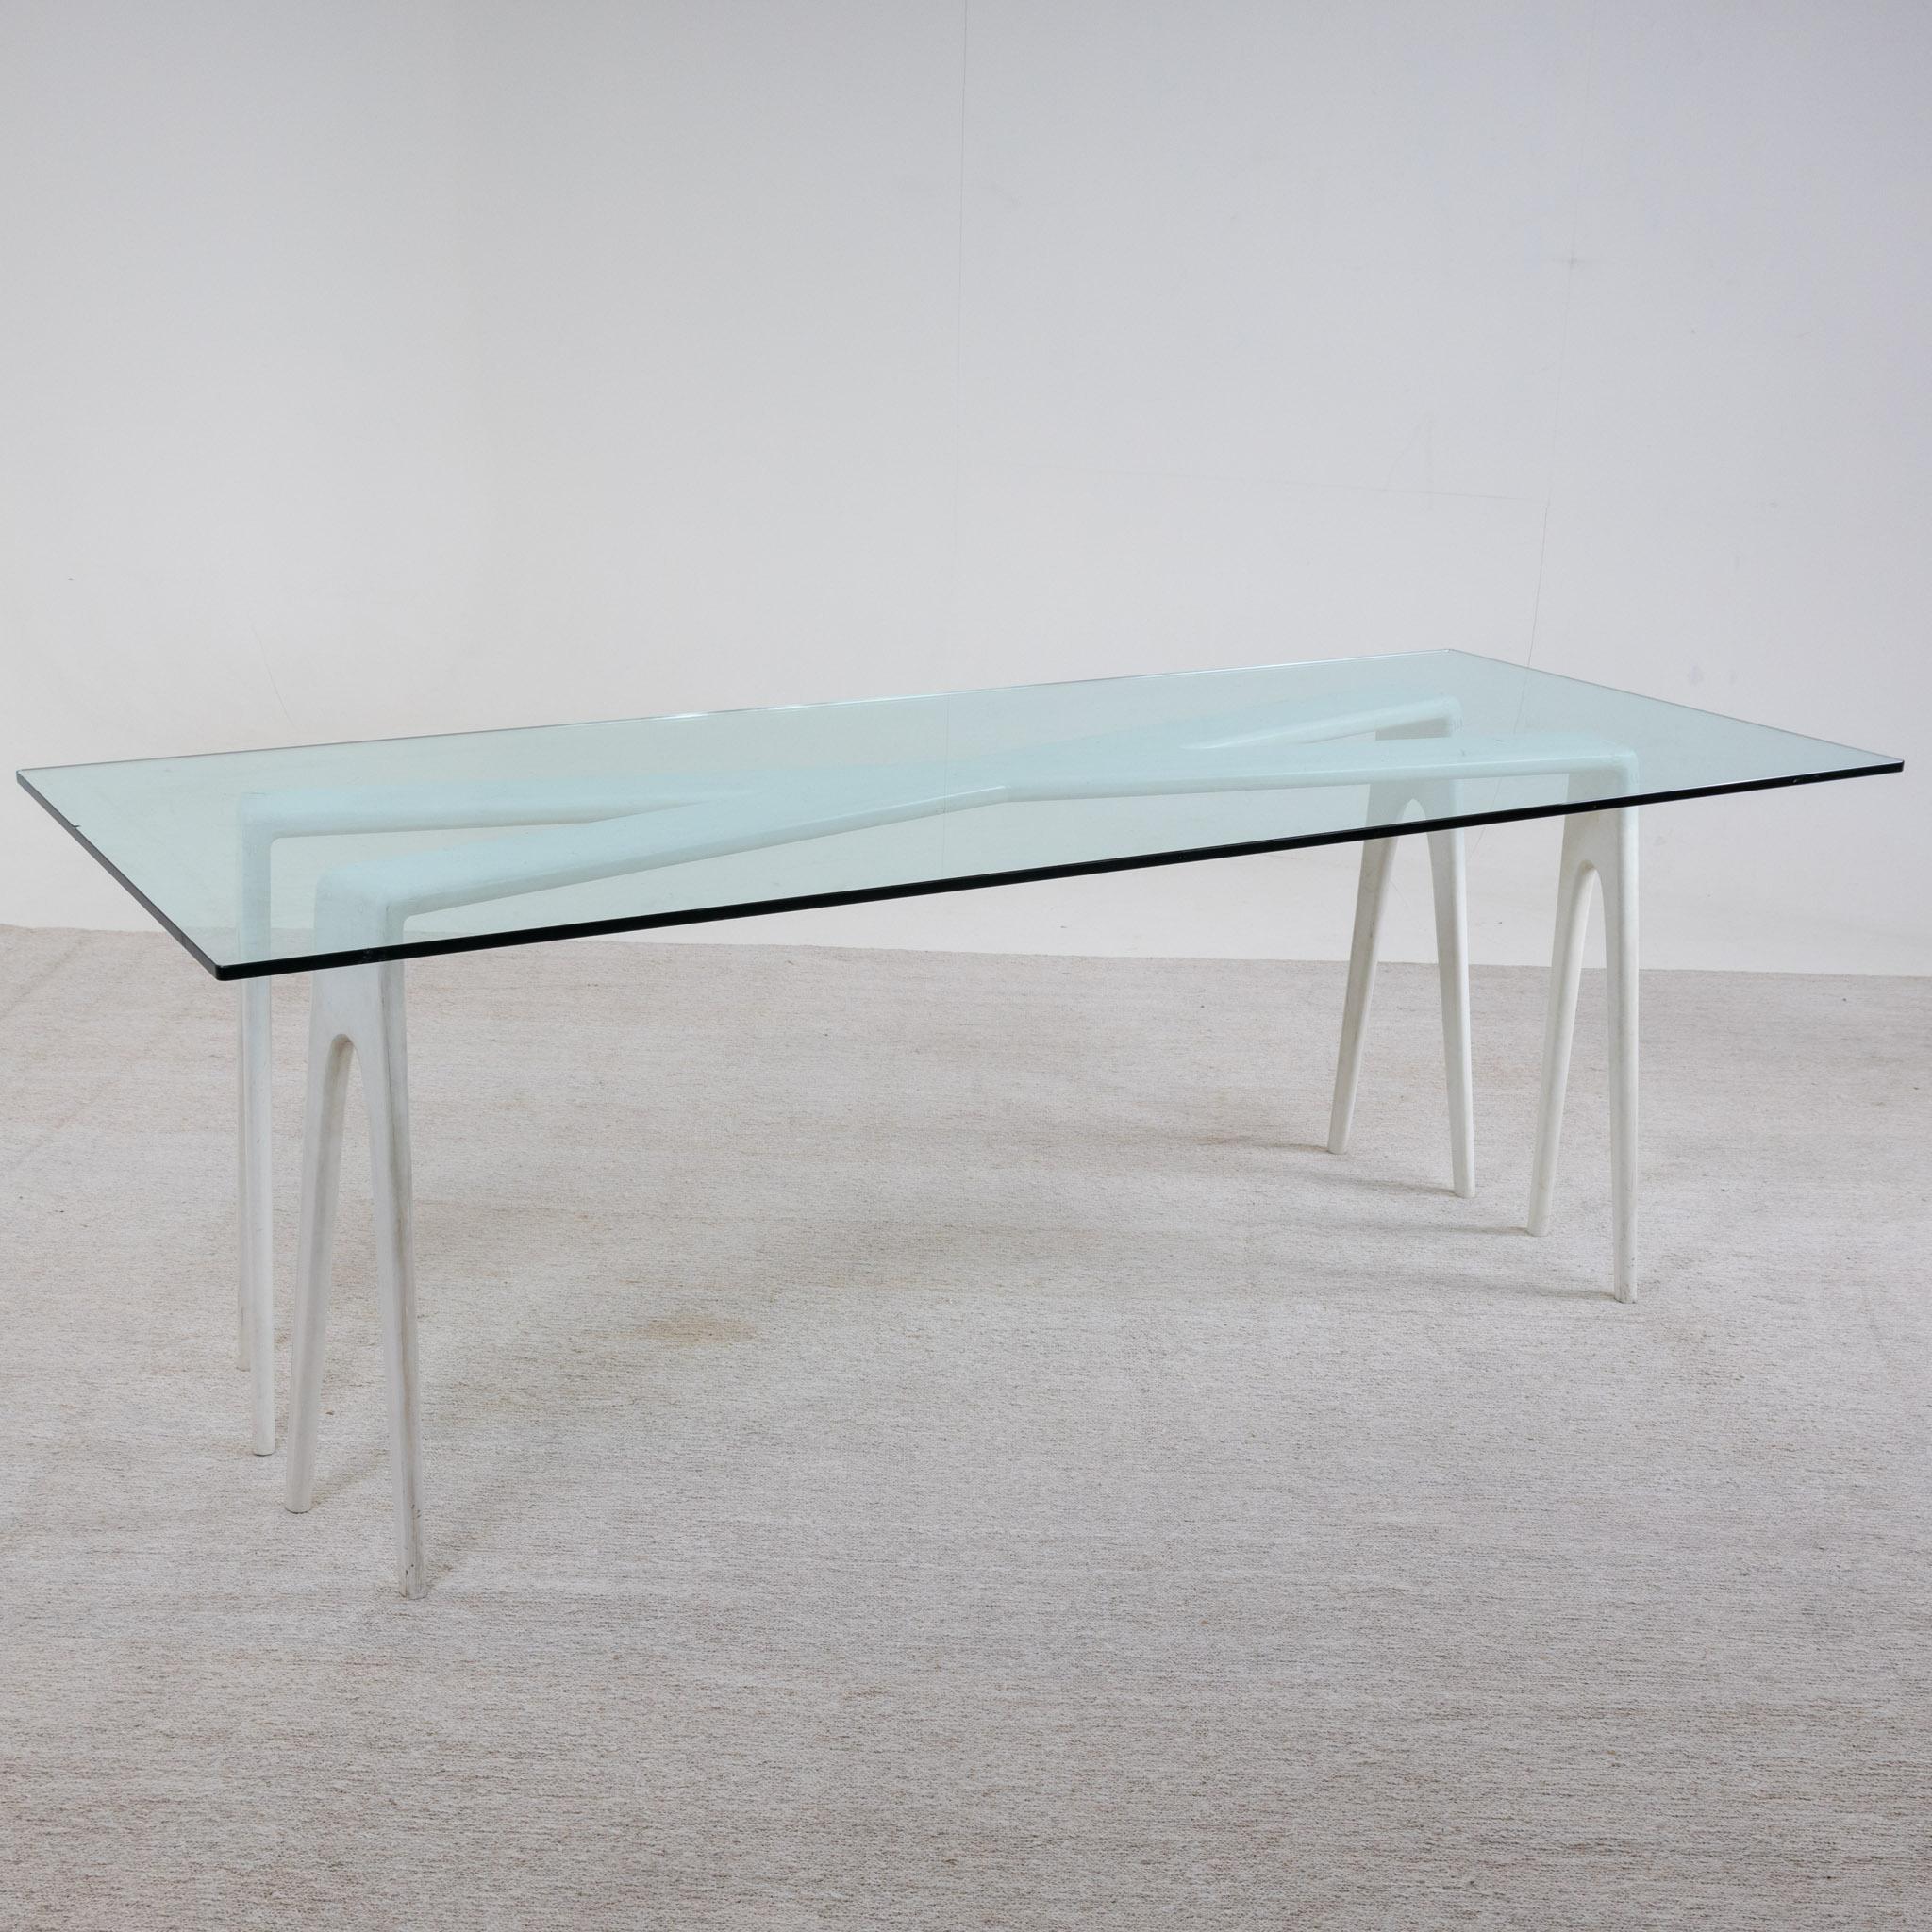 Italian White Dining Table with Glass Top, Le Opere E i Giorni, Italy 20th Century For Sale